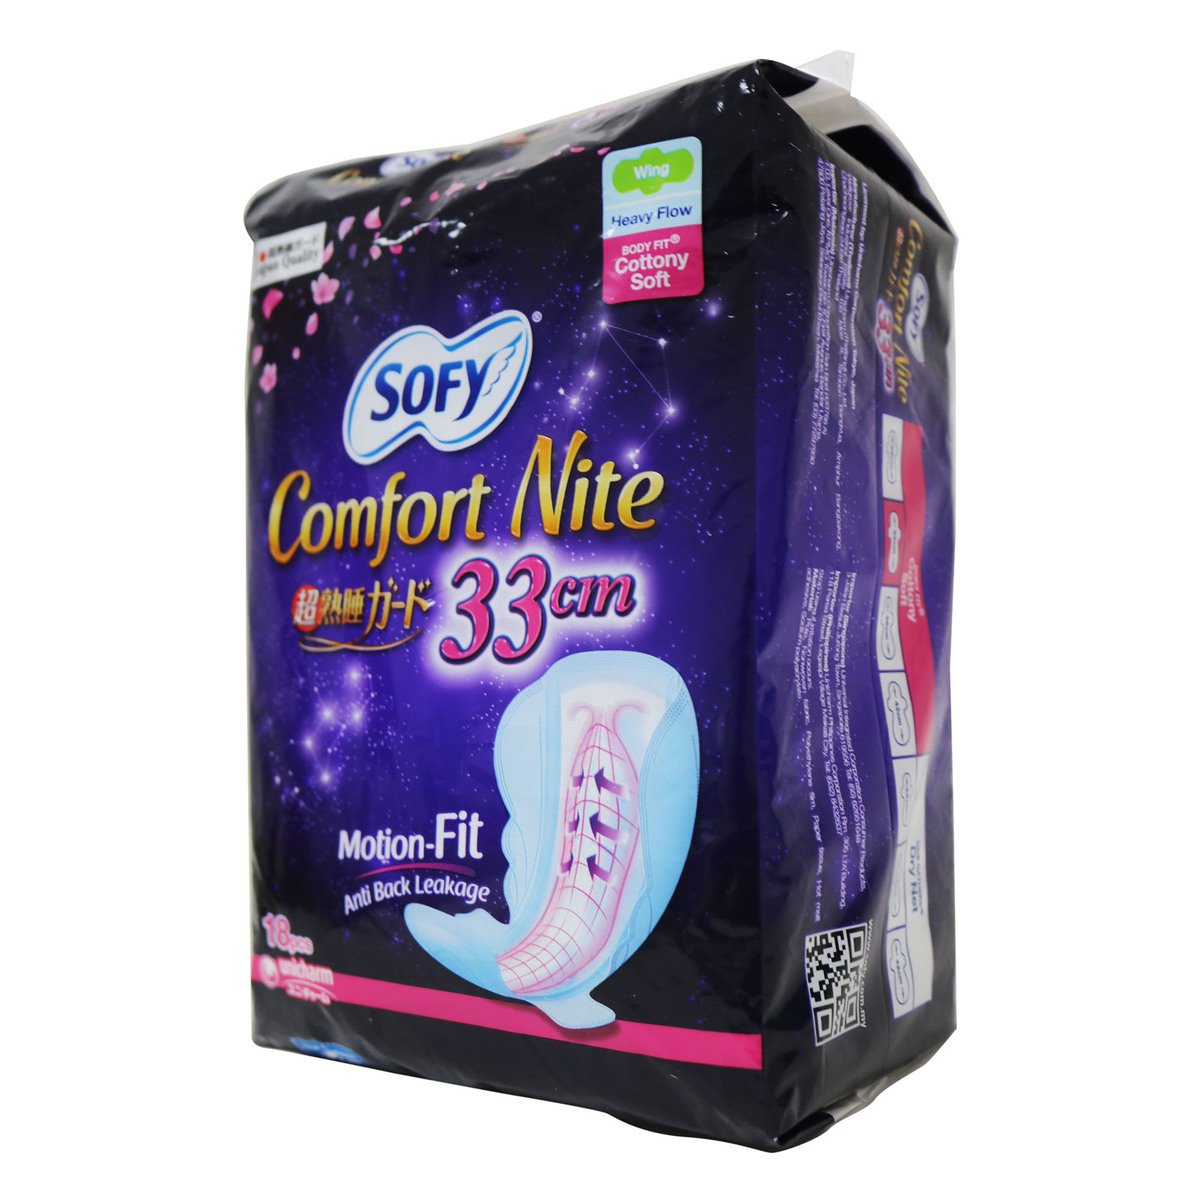 Sofy Body Fit CNWS Sanitary Pads 33Cm 18 Counts